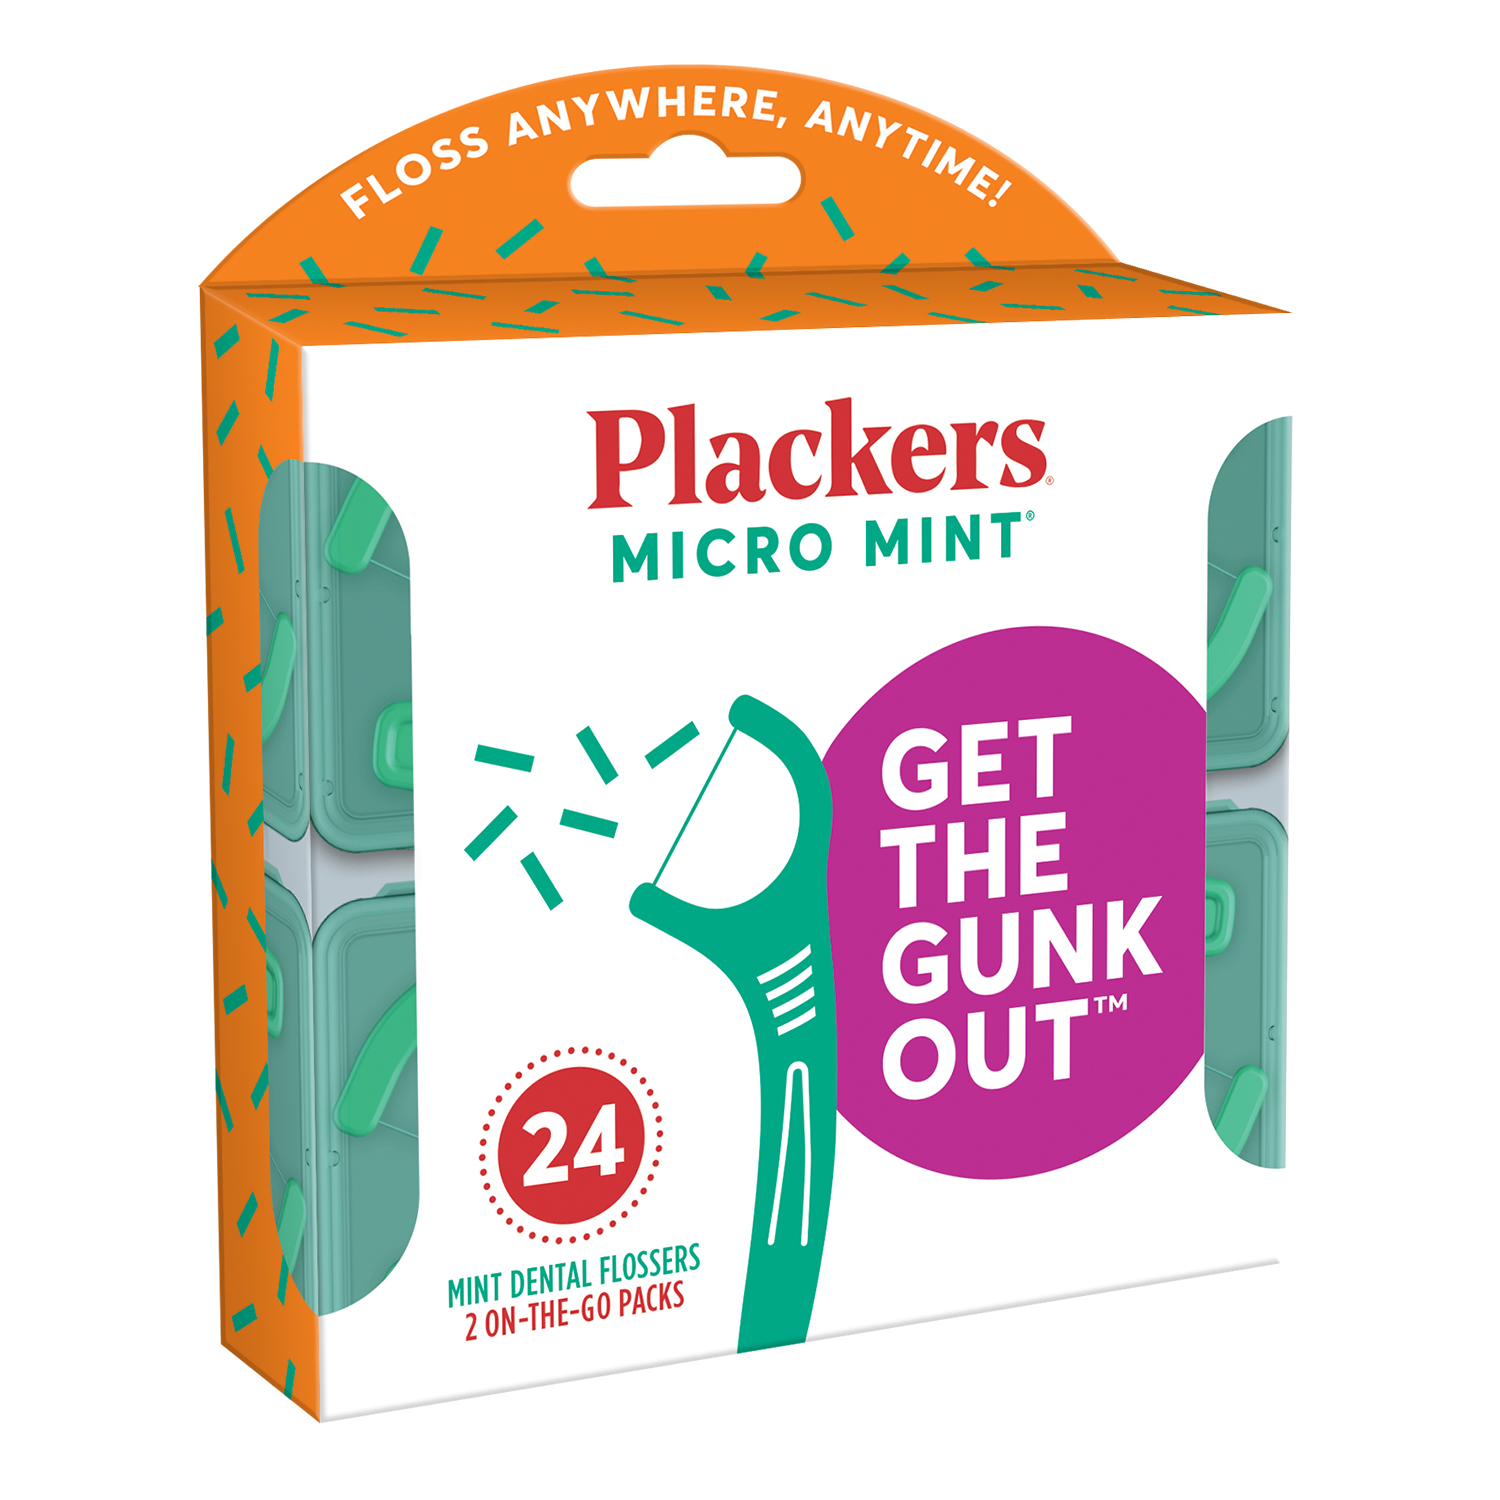 Plackers  MICRO MINT® Dental Flossers 2 On-The-Go Packs-85751/303857518-AM-4